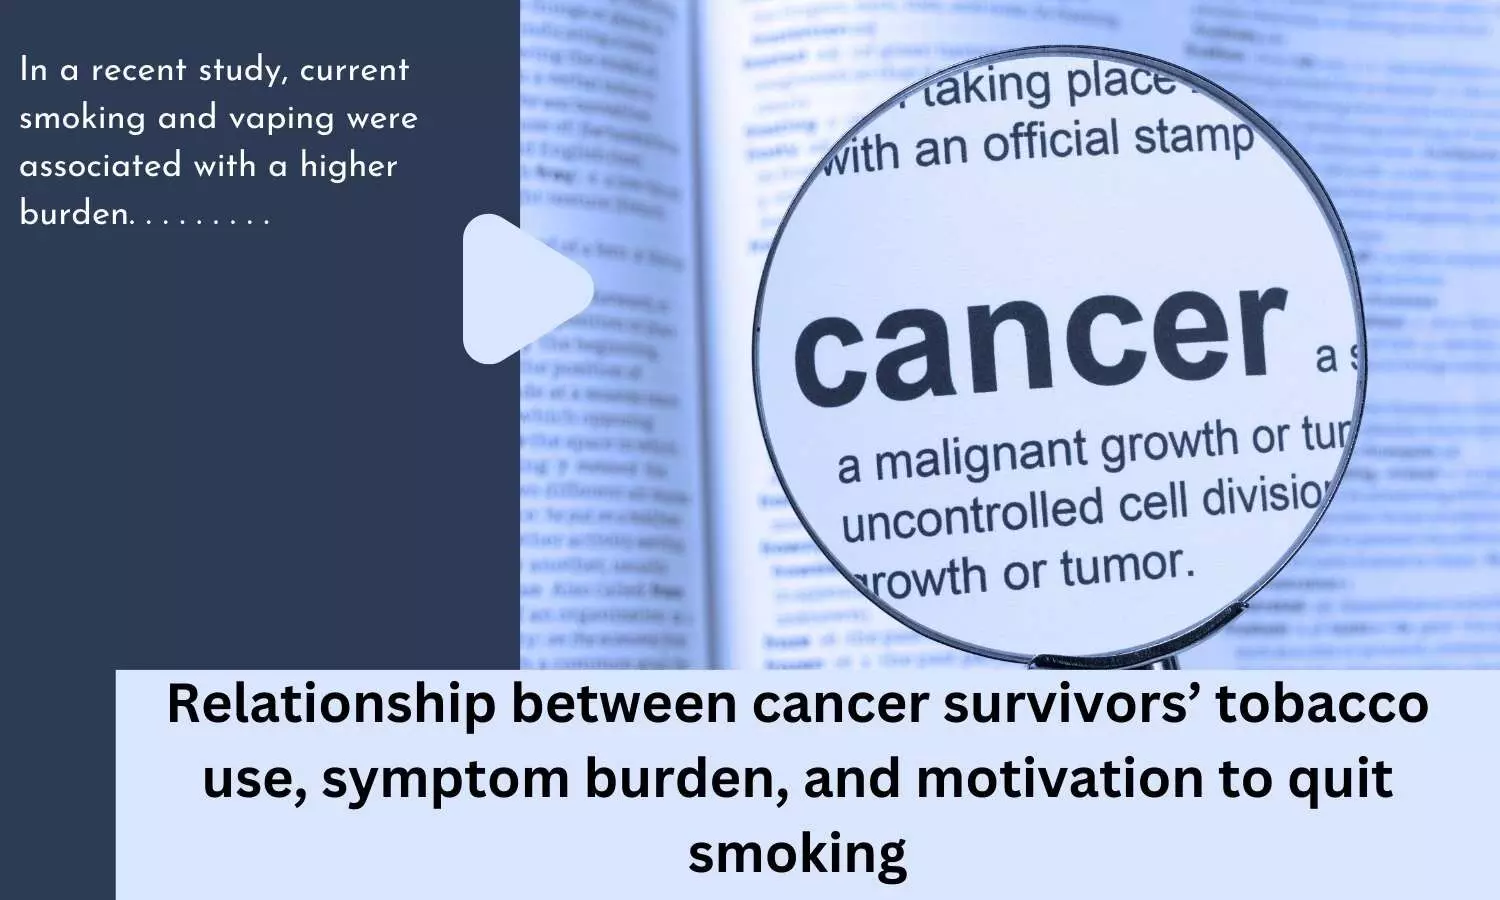 Relationship between cancer survivors tobacco use, symptom burden, and motivation to quit smoking